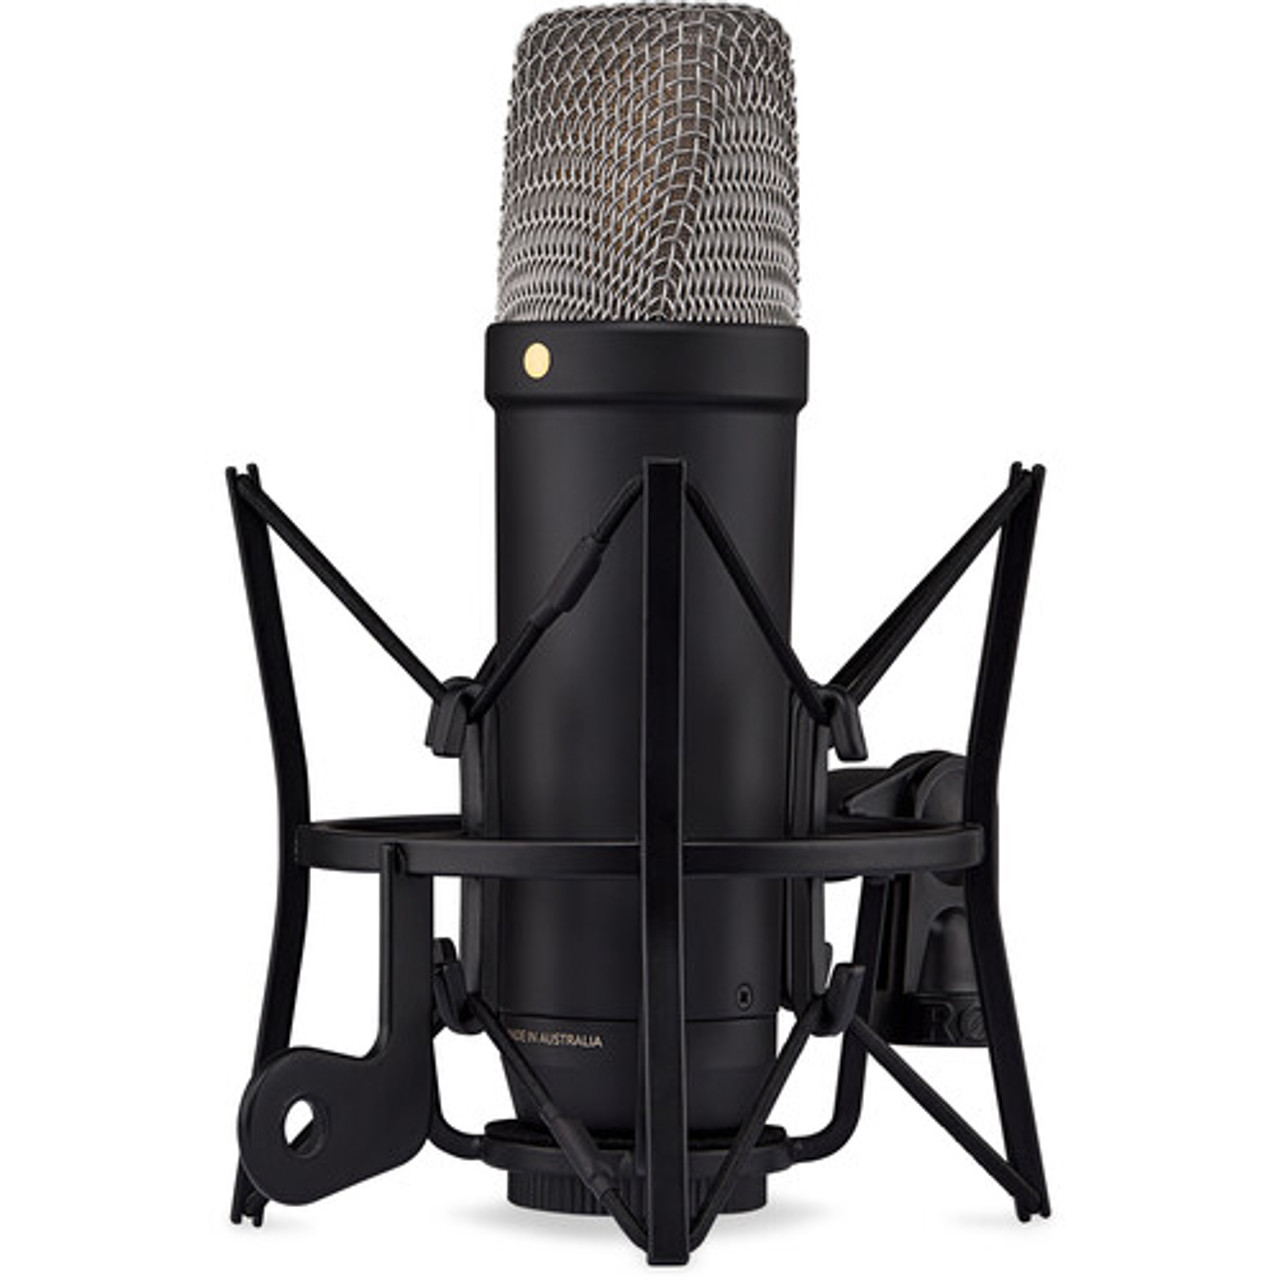 Rode NT1 Cardioid Condensor Microphone